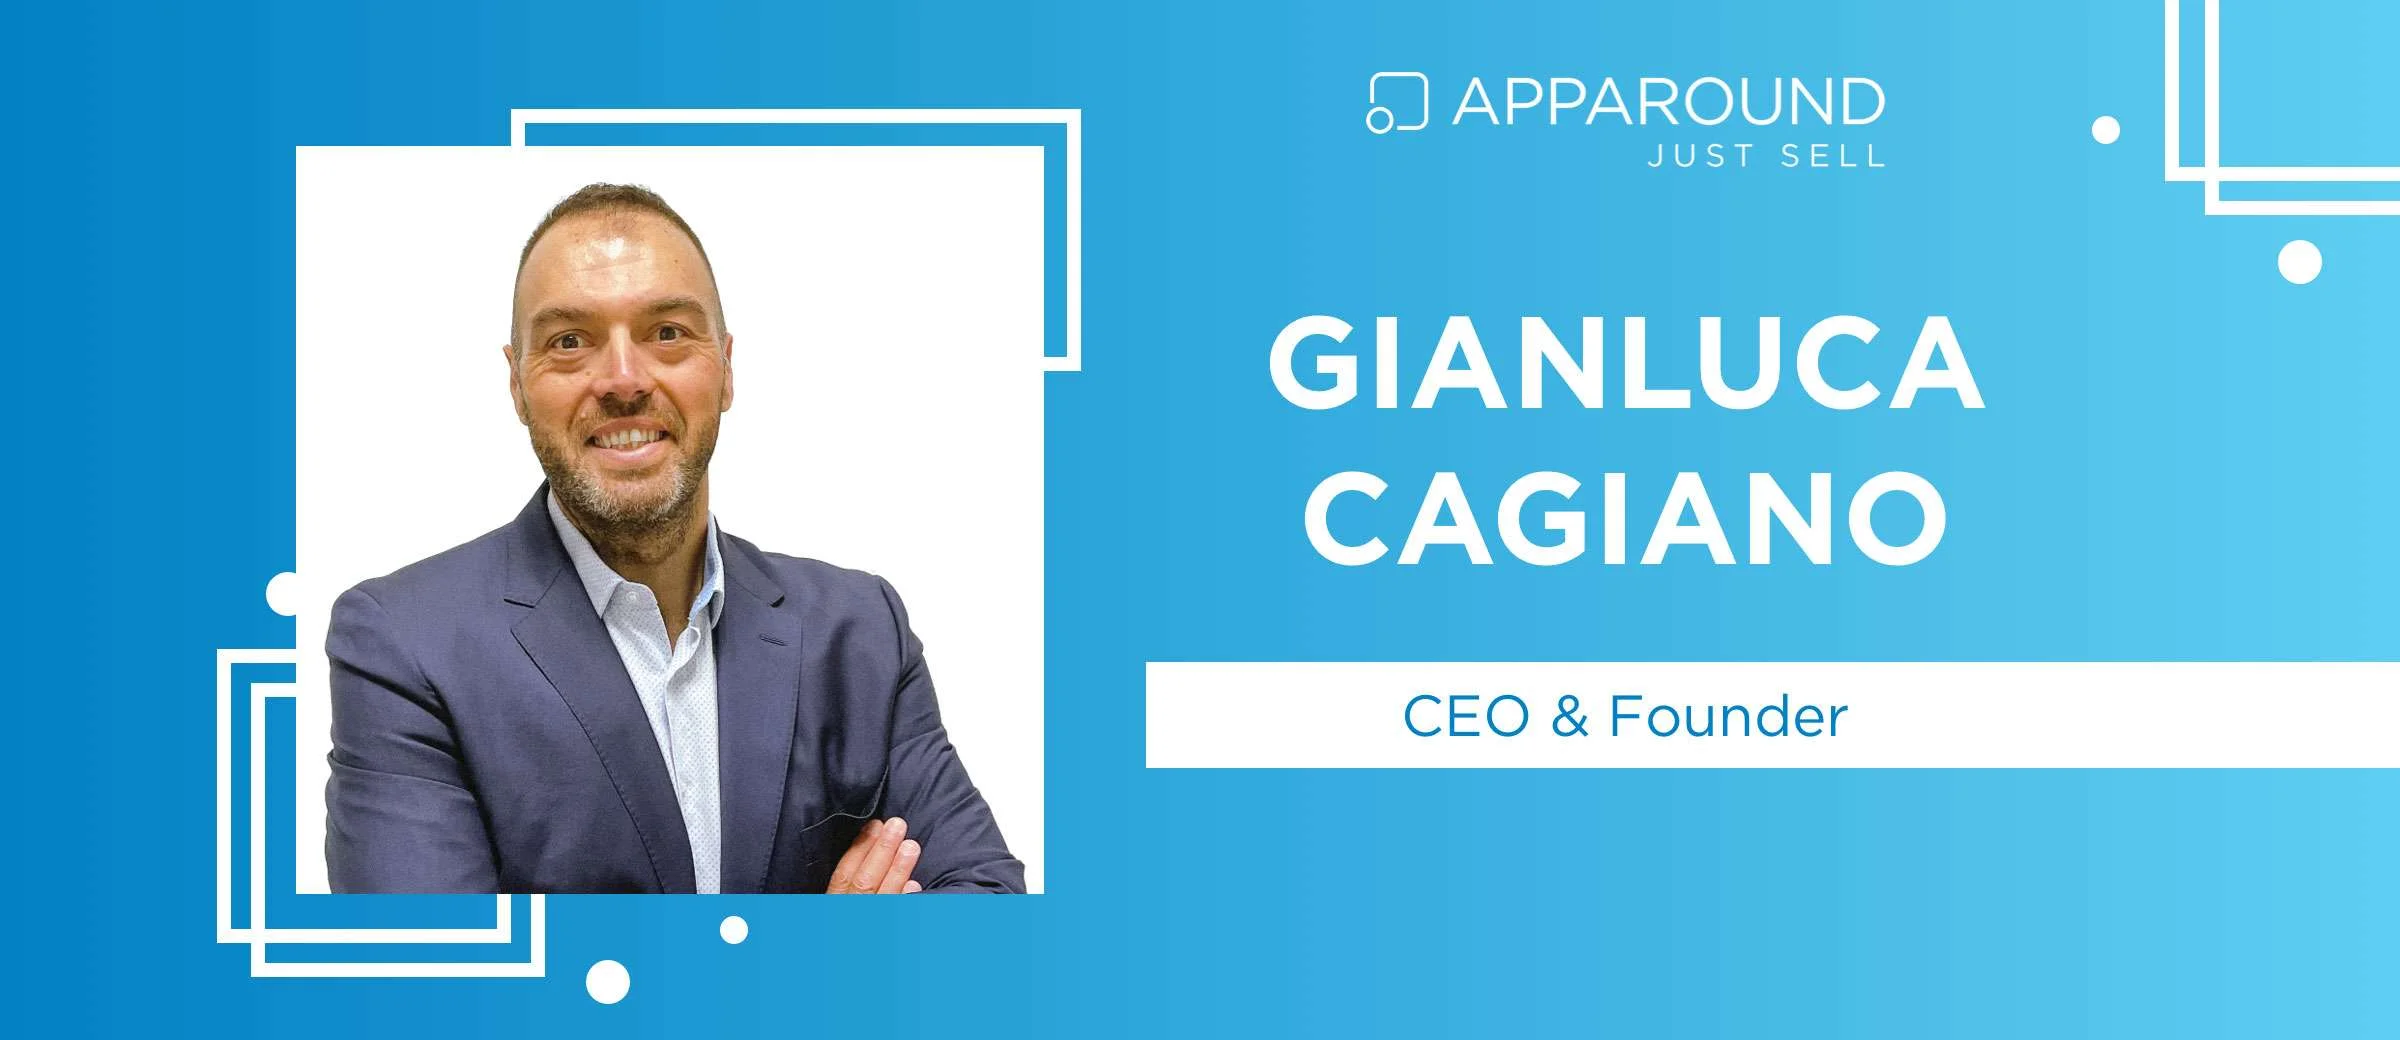 Inside Stories: What Makes a Leader by Gianluca Cagiano